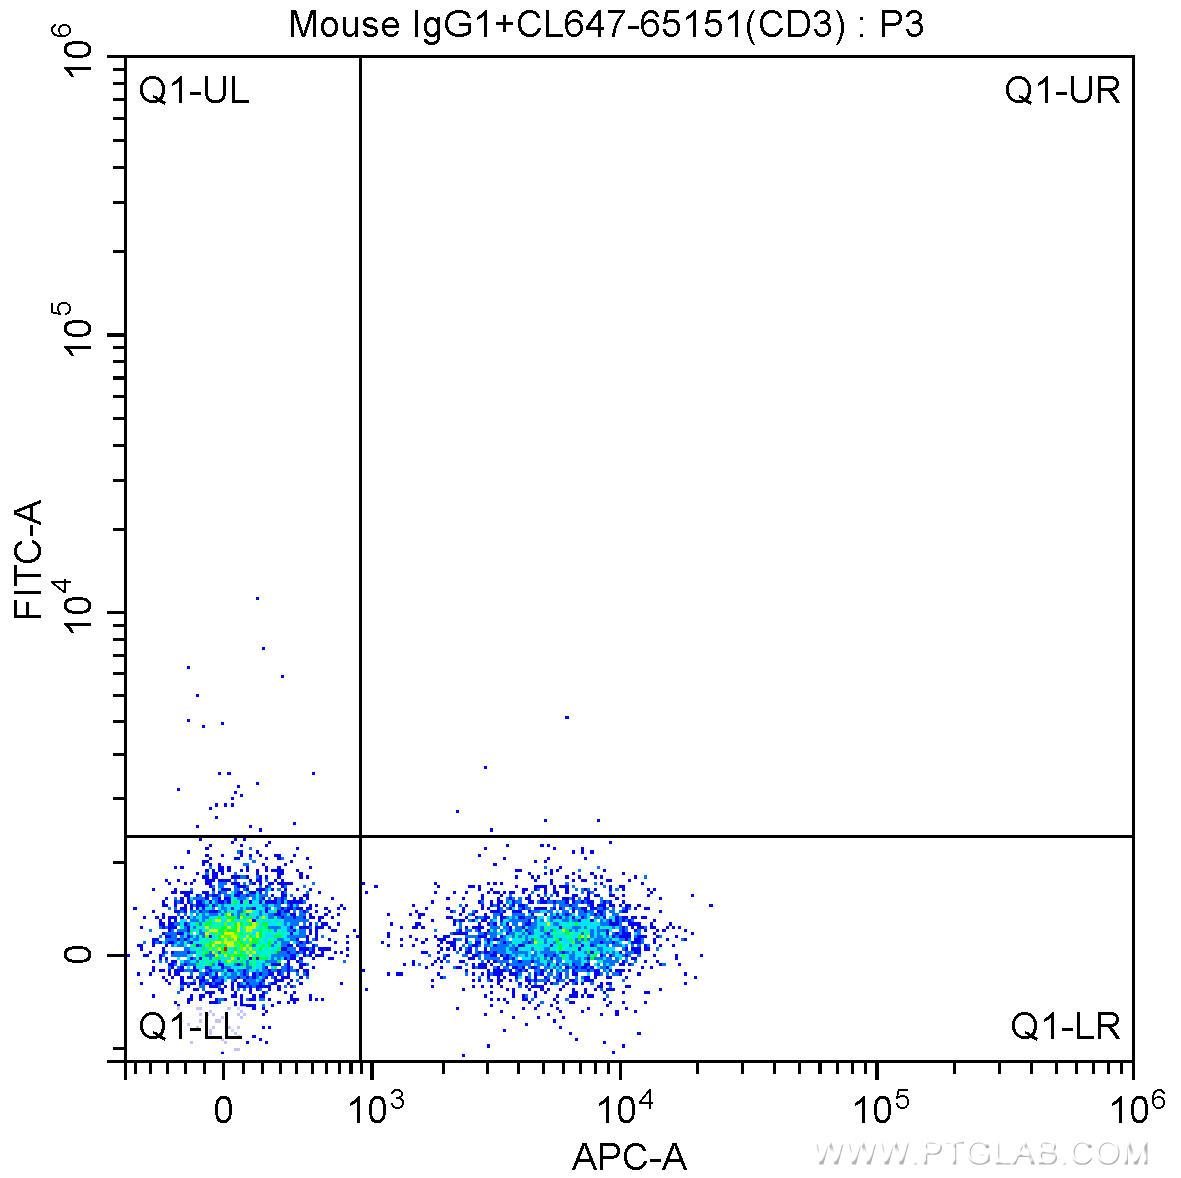 1X10^6 human peripheral blood lymphocytes were surface stained with CoraLite®647-conjugated Anti-Human CD3 (CL647-65151, Clone: UCHT1), 0.5 ug Mouse IgG1 Isotype Control and CoraLite®488-Conjugated AffiniPure Goat Anti-Mouse IgG(H+L) at dilution 1:1000. Cells were not fixed.